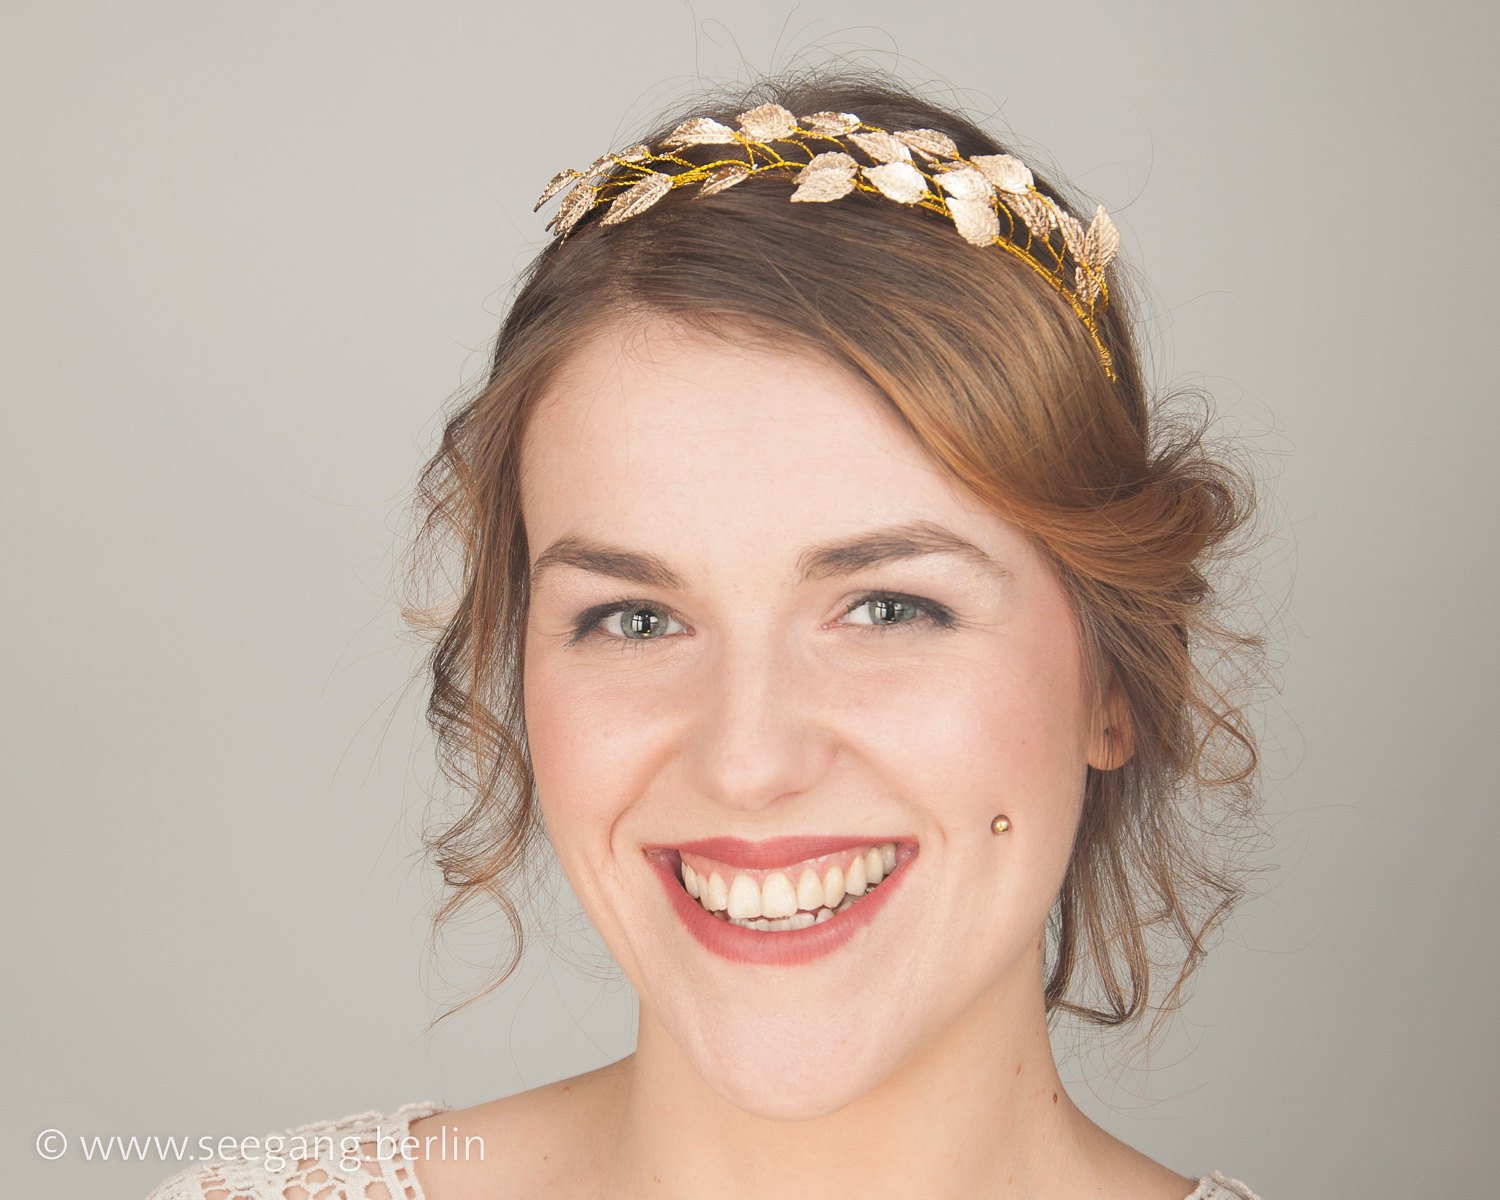 HAIR CIRCLET - BRIDAL OR FESTIVAL HAIR JEWELLERY WITH GOLD COLOURED LEAFS © Seegang Berlin